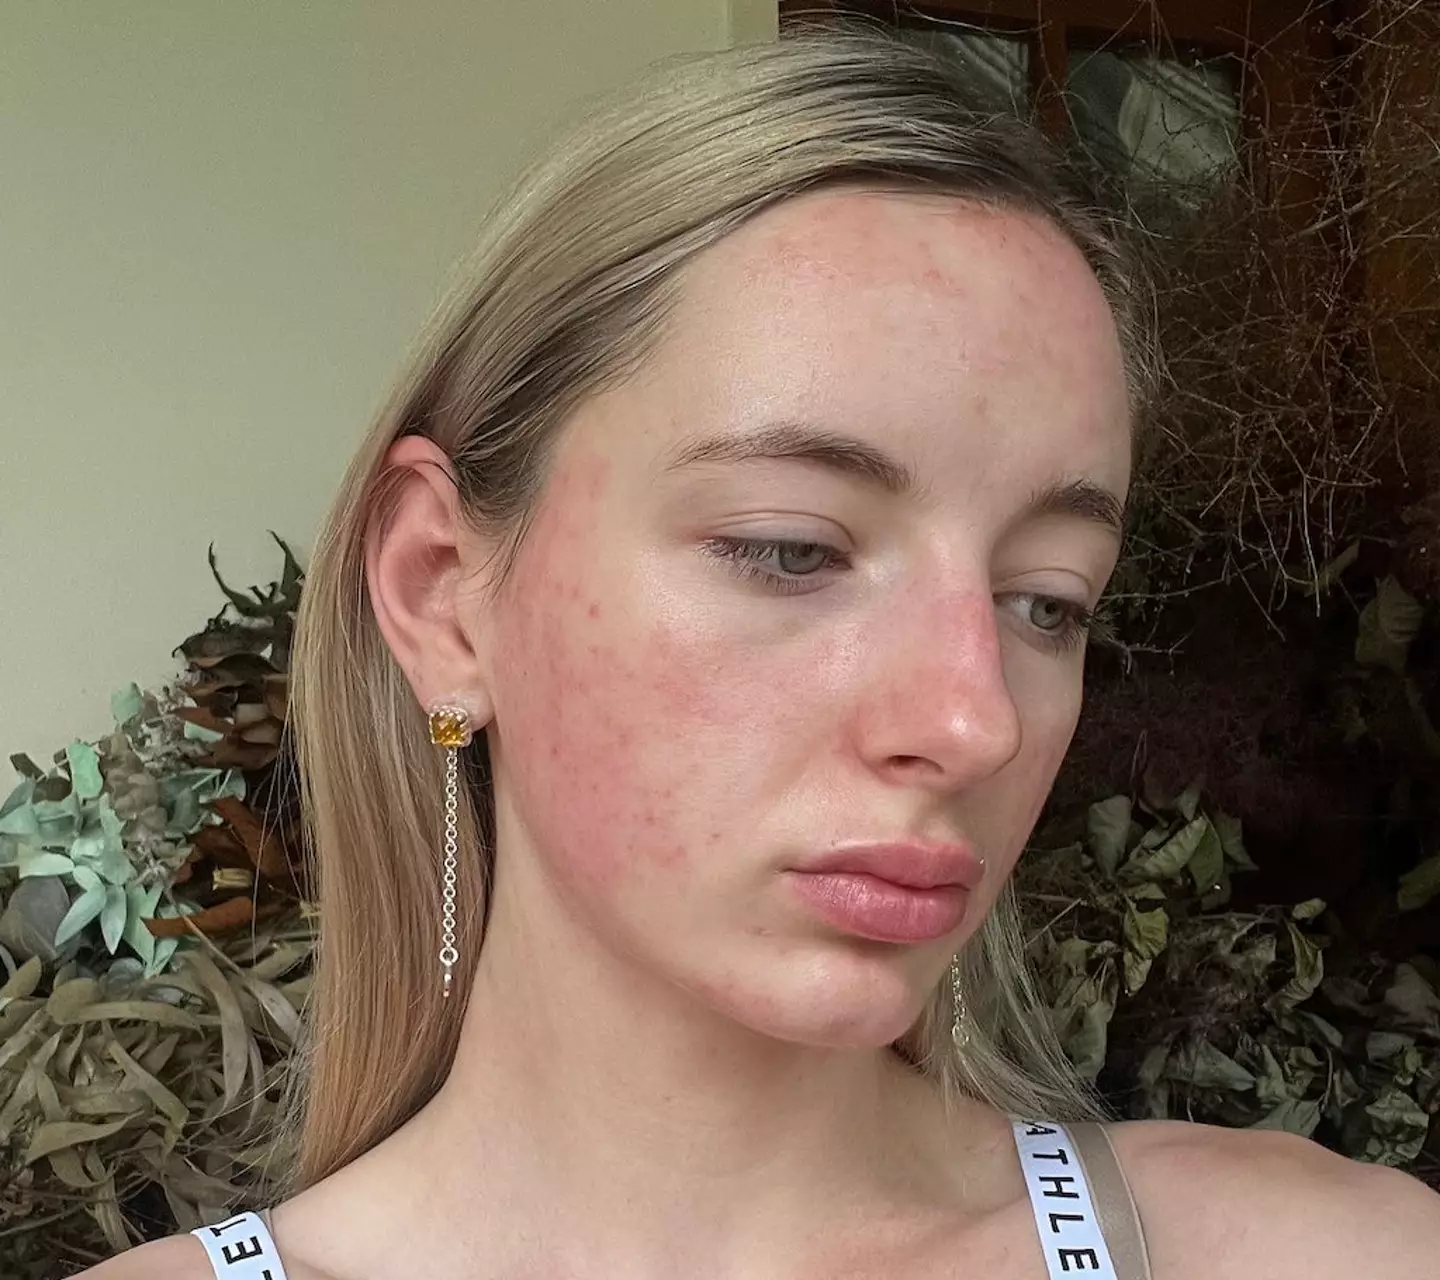 Poppy developed a rash on her face after drinking.